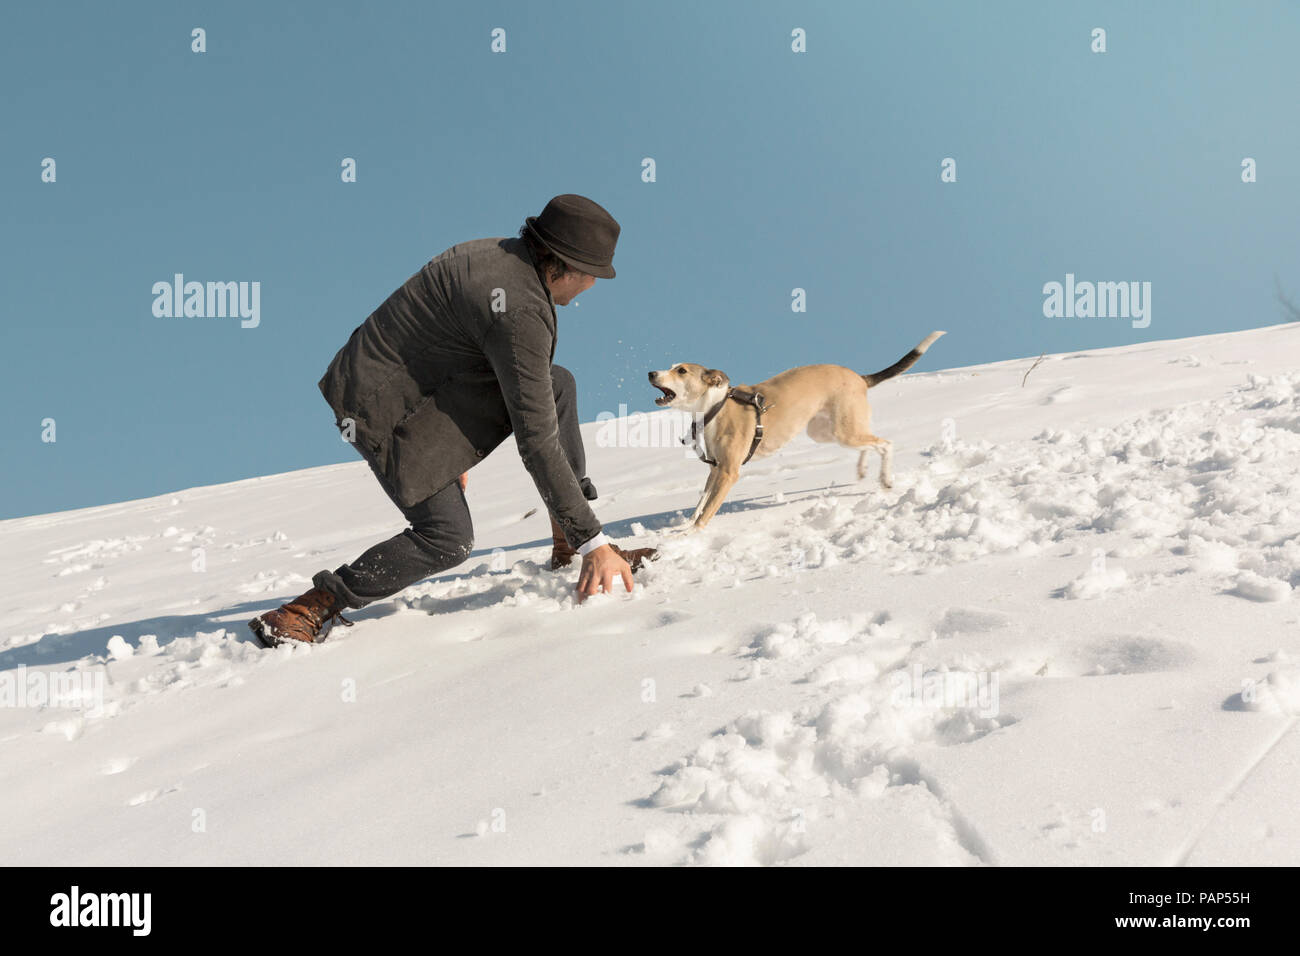 Man playing with dog in winter, throwing snow Stock Photo